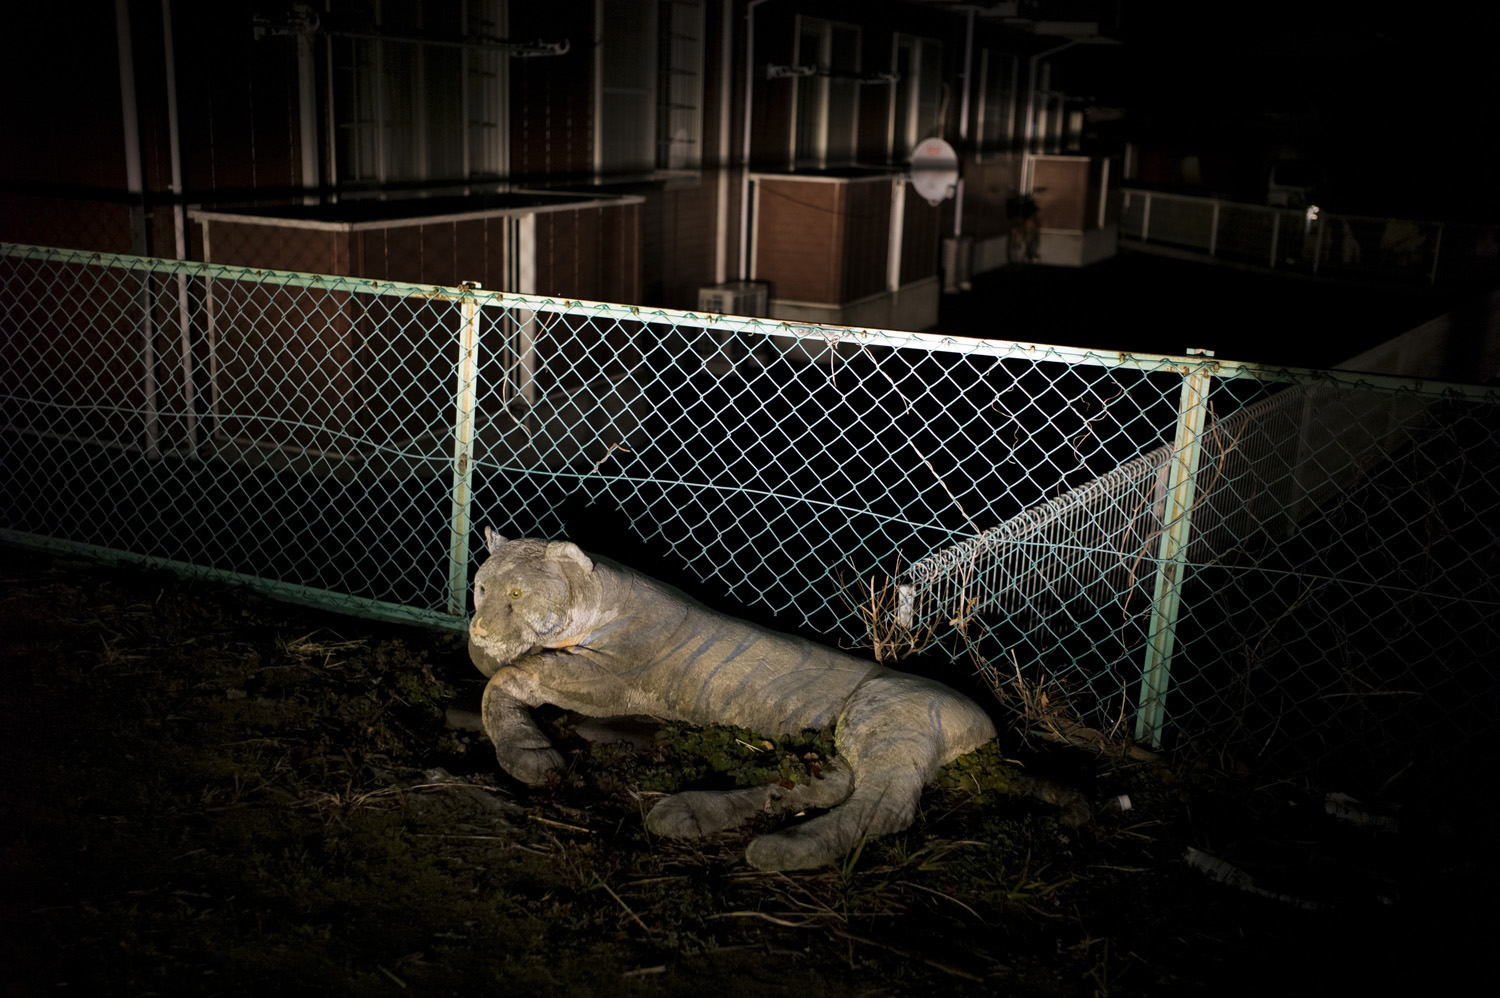 Japan, Iwaki, 2014. A stuffed animal lies outside of a cheap housing block in Iwaki where nuclear and decontamination workers from the Fukushima Daiichi Nuclear Power Station live.